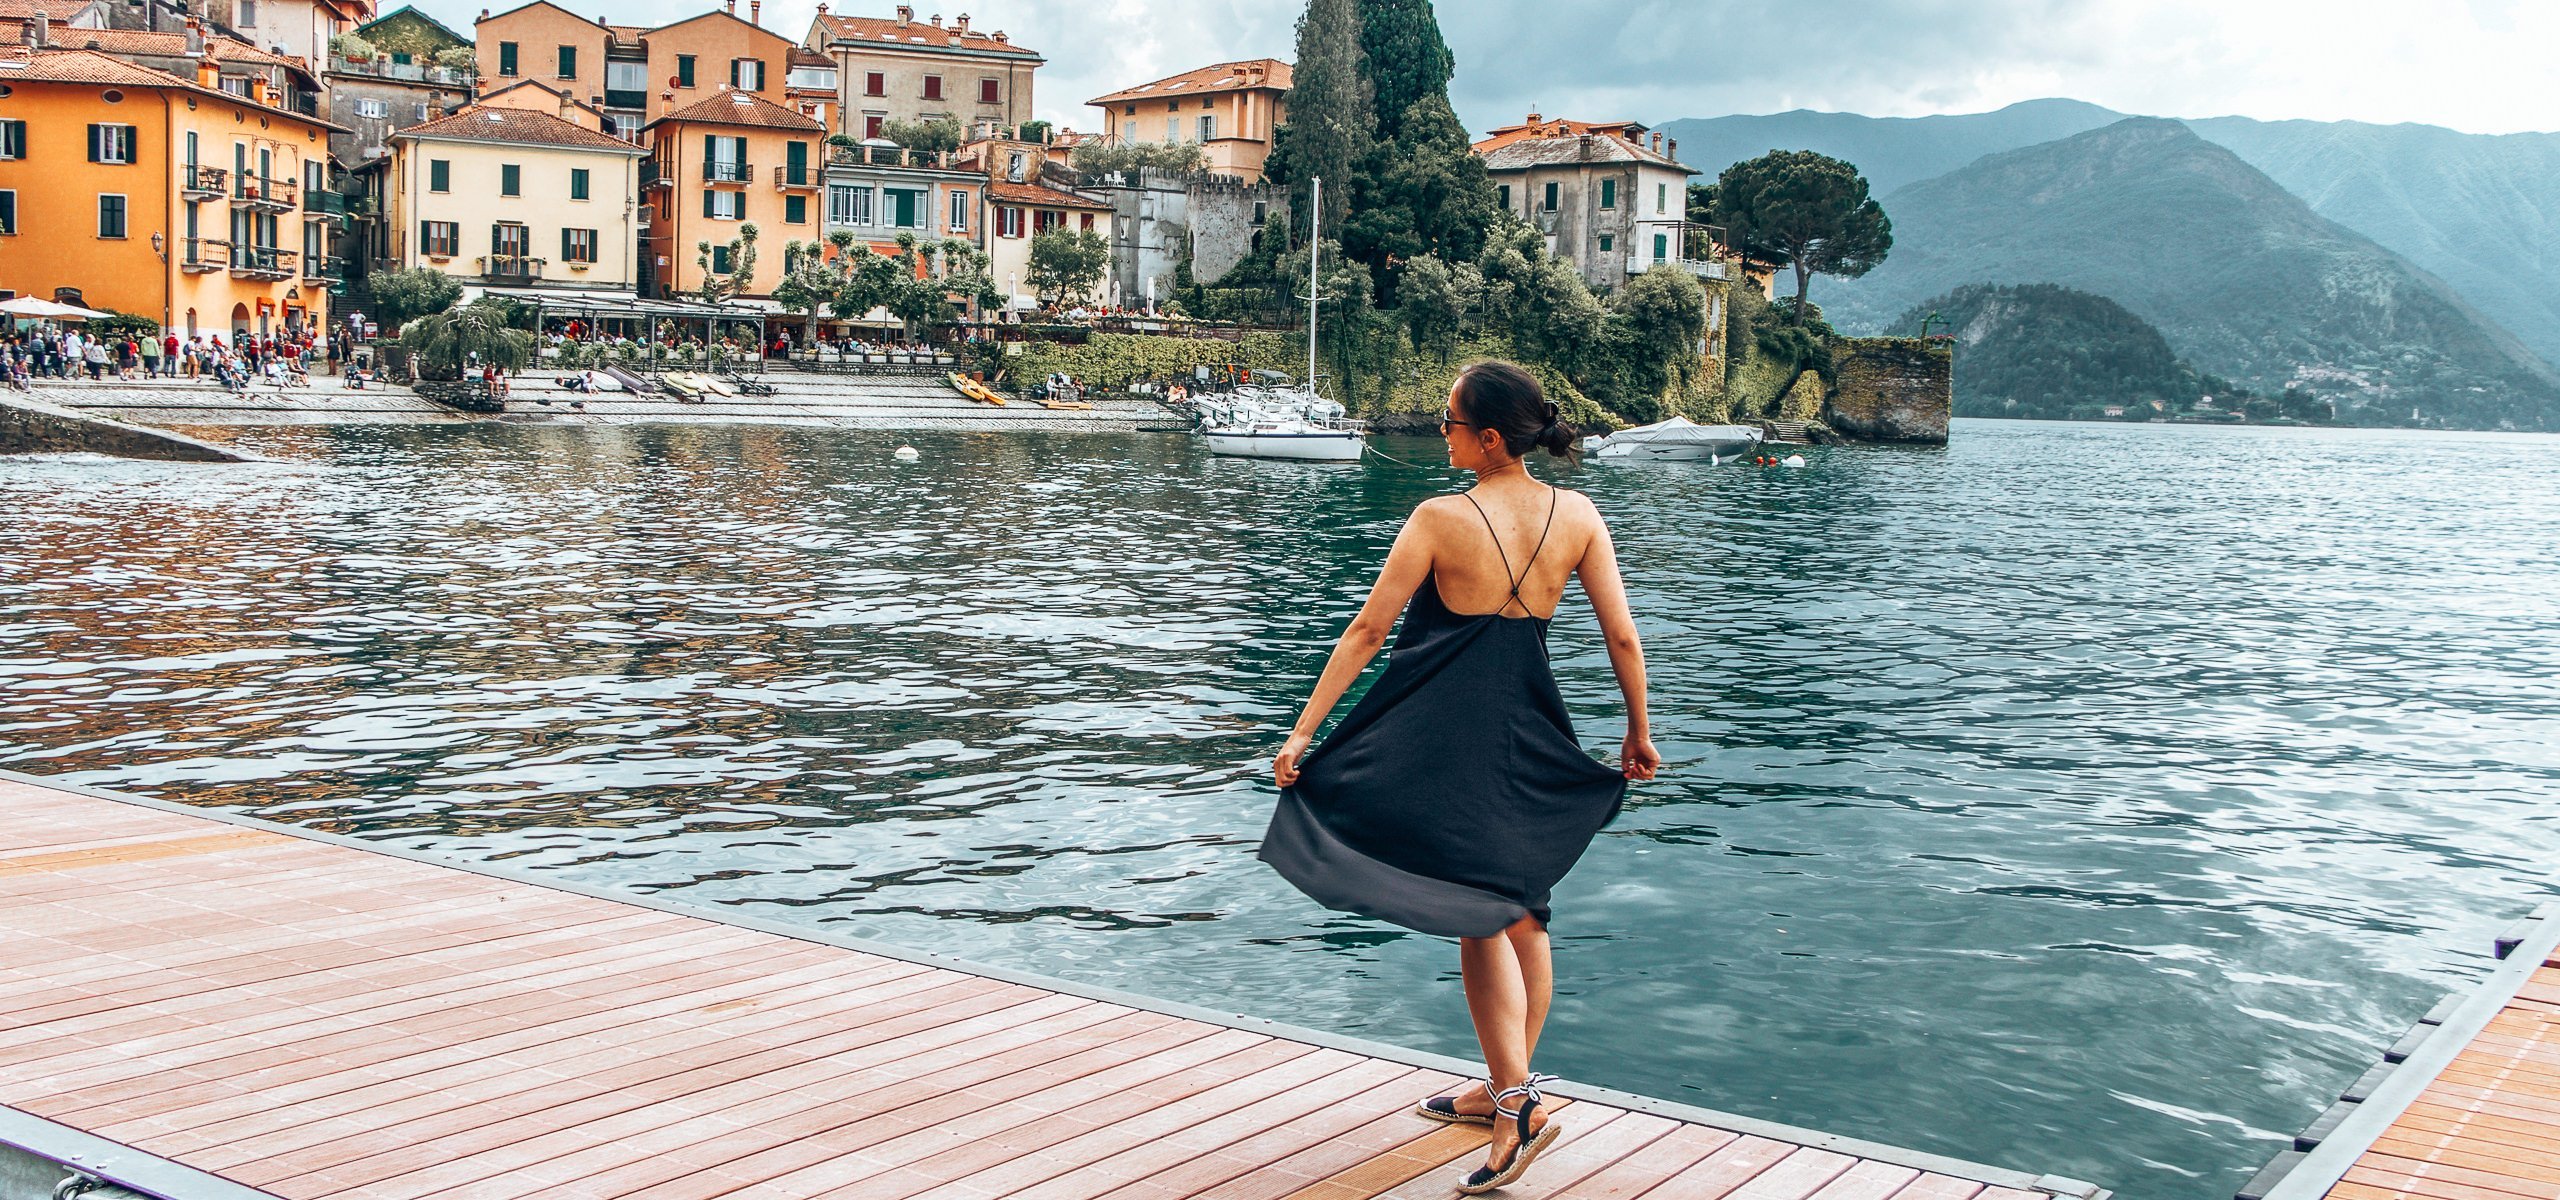 Twirling in a black dress on a pontoon at Varenna, Lake Como, Italy